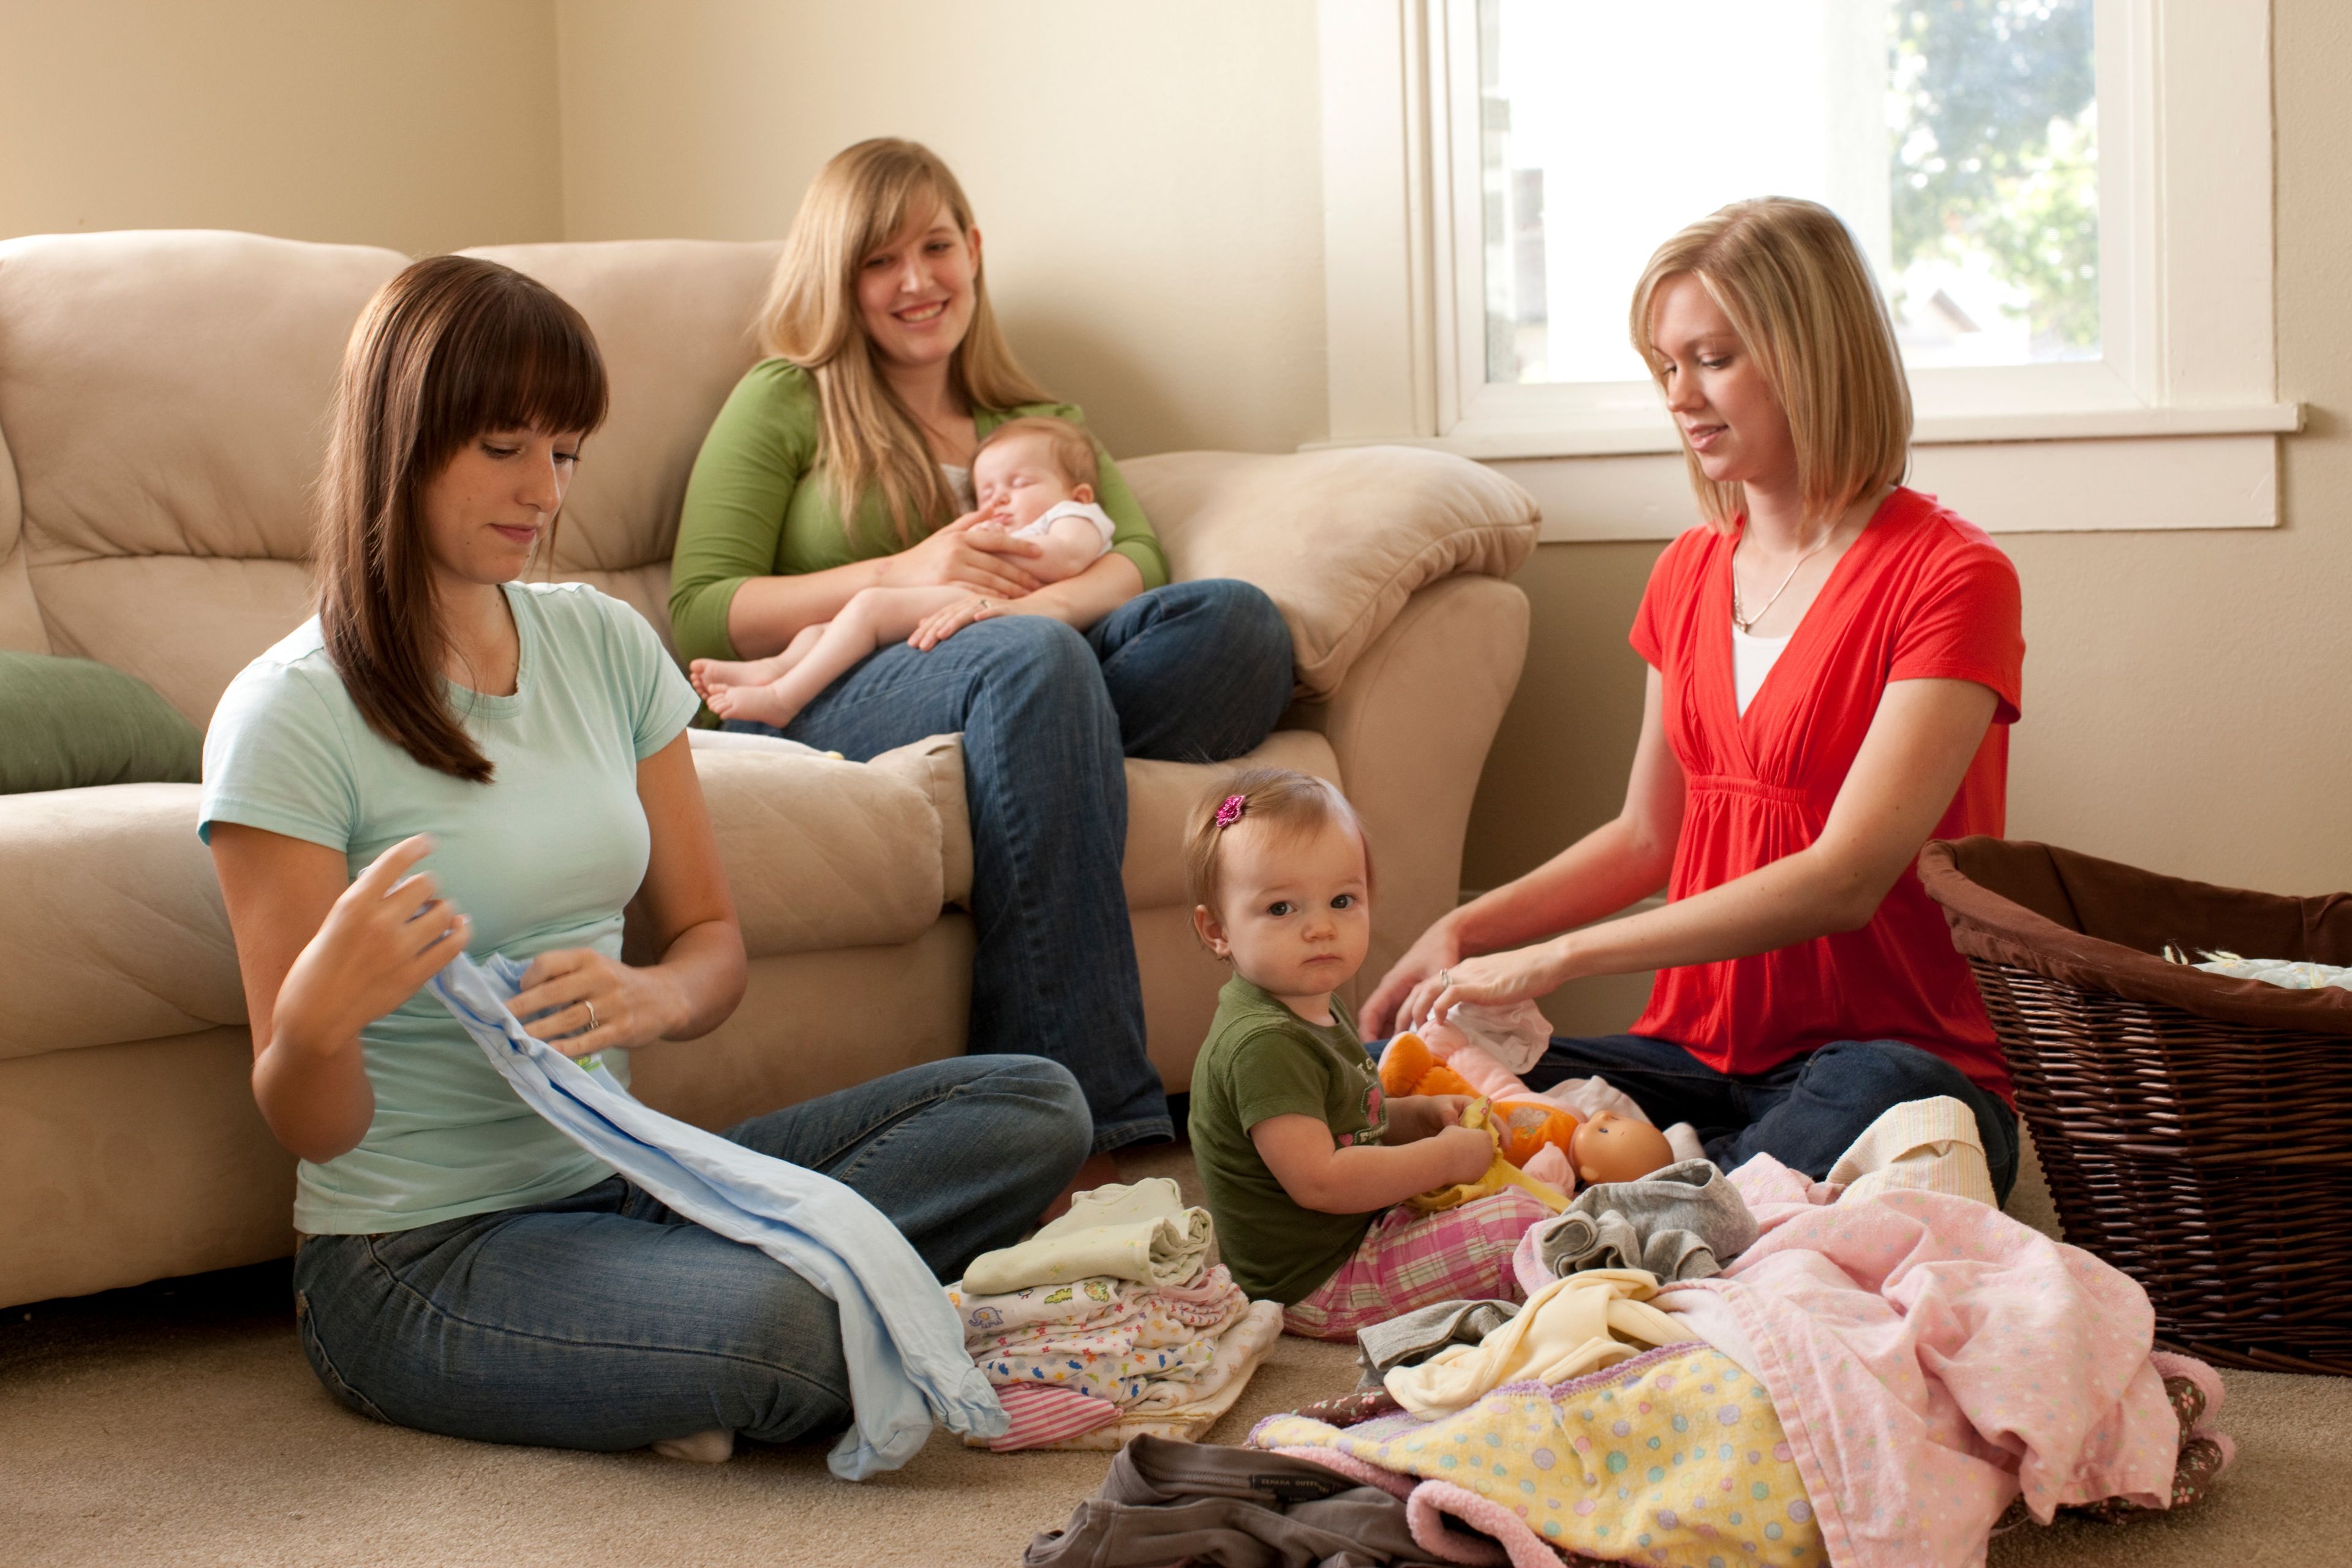 Ministering sisters help a woman with two children fold her laundry.